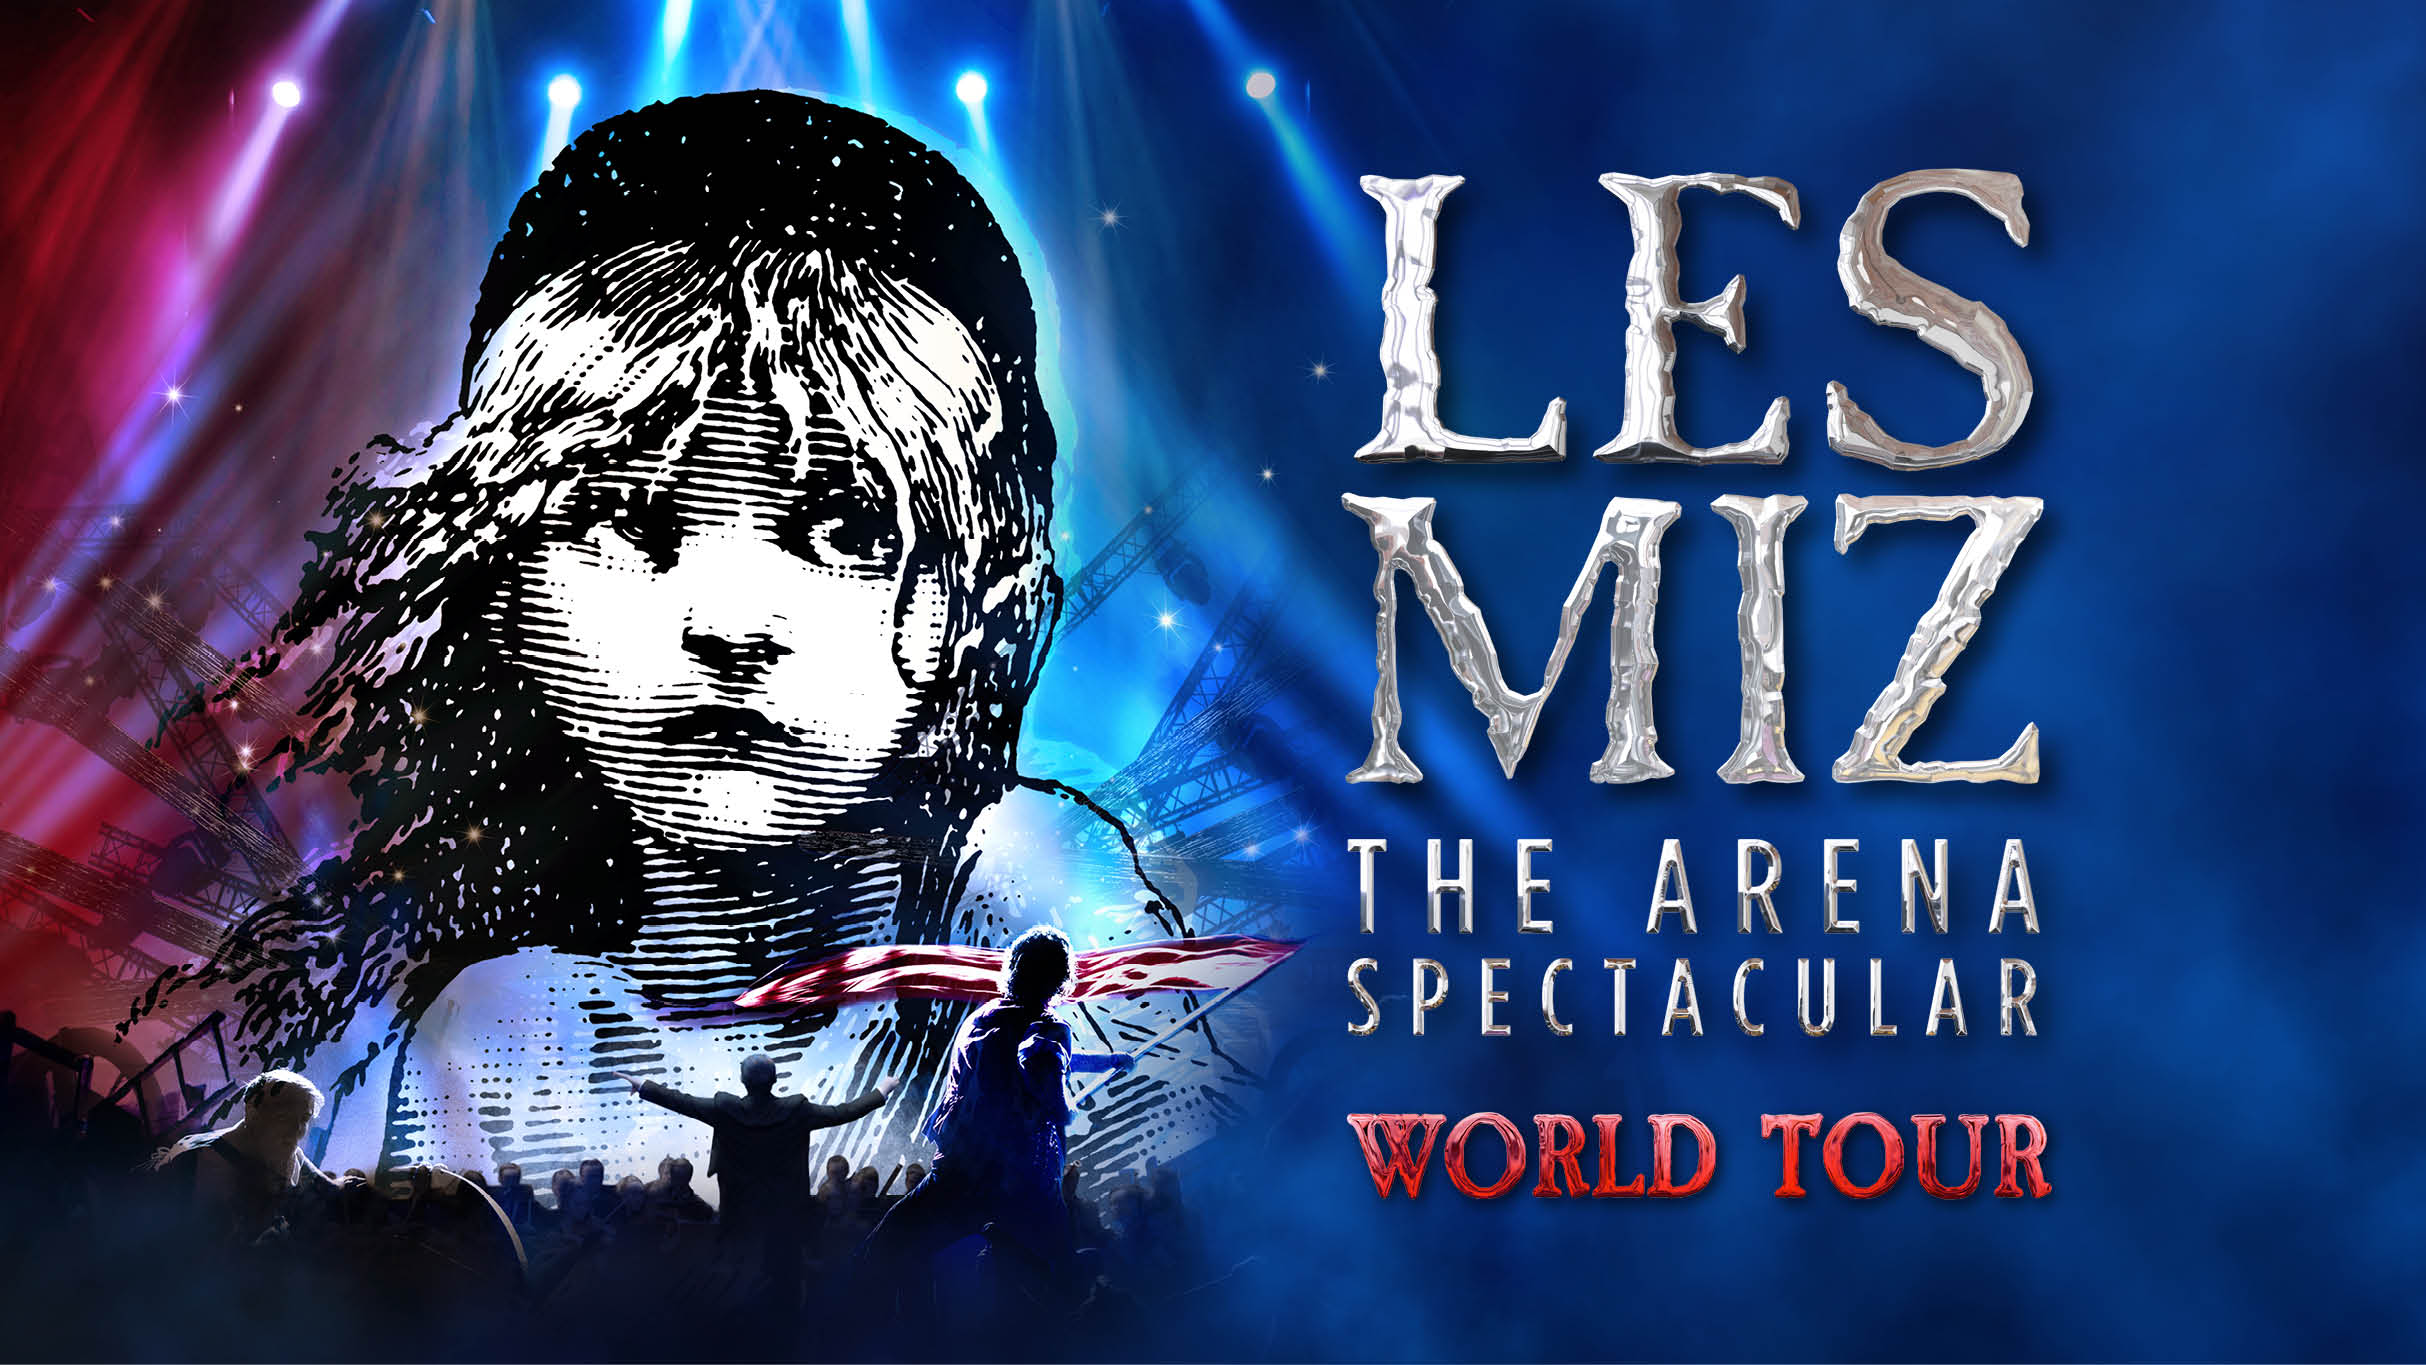 Image name Les Miserables The Arena Spectacular at Utilita Arena Sheffield Sheffield the 2 image from the post Les Miserables: The Arena Spectacular at Utilita Arena Sheffield, Sheffield in Yorkshire.com.